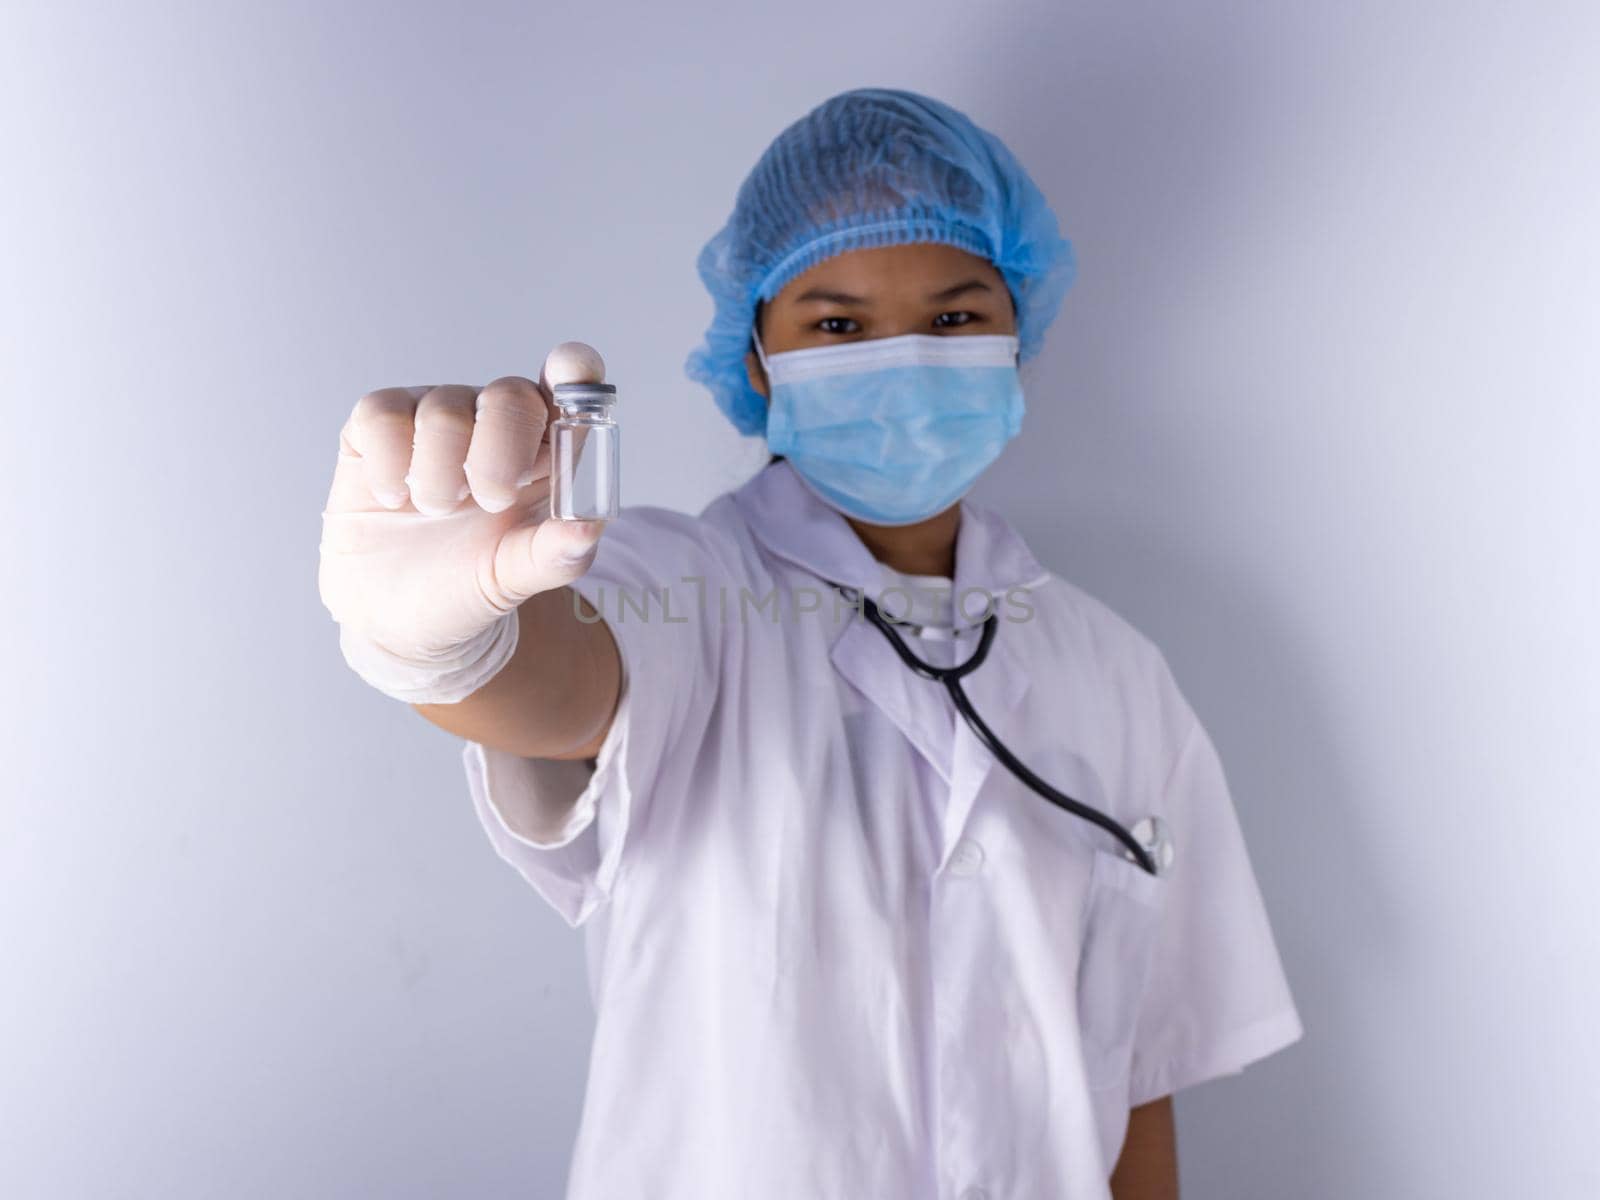 Studio portrait of a female doctor wearing a mask and wearing a hat. in the hand of the vaccine bottle and stretched out his arms in front standing on a white background. studio shot background, COVID-19 concept